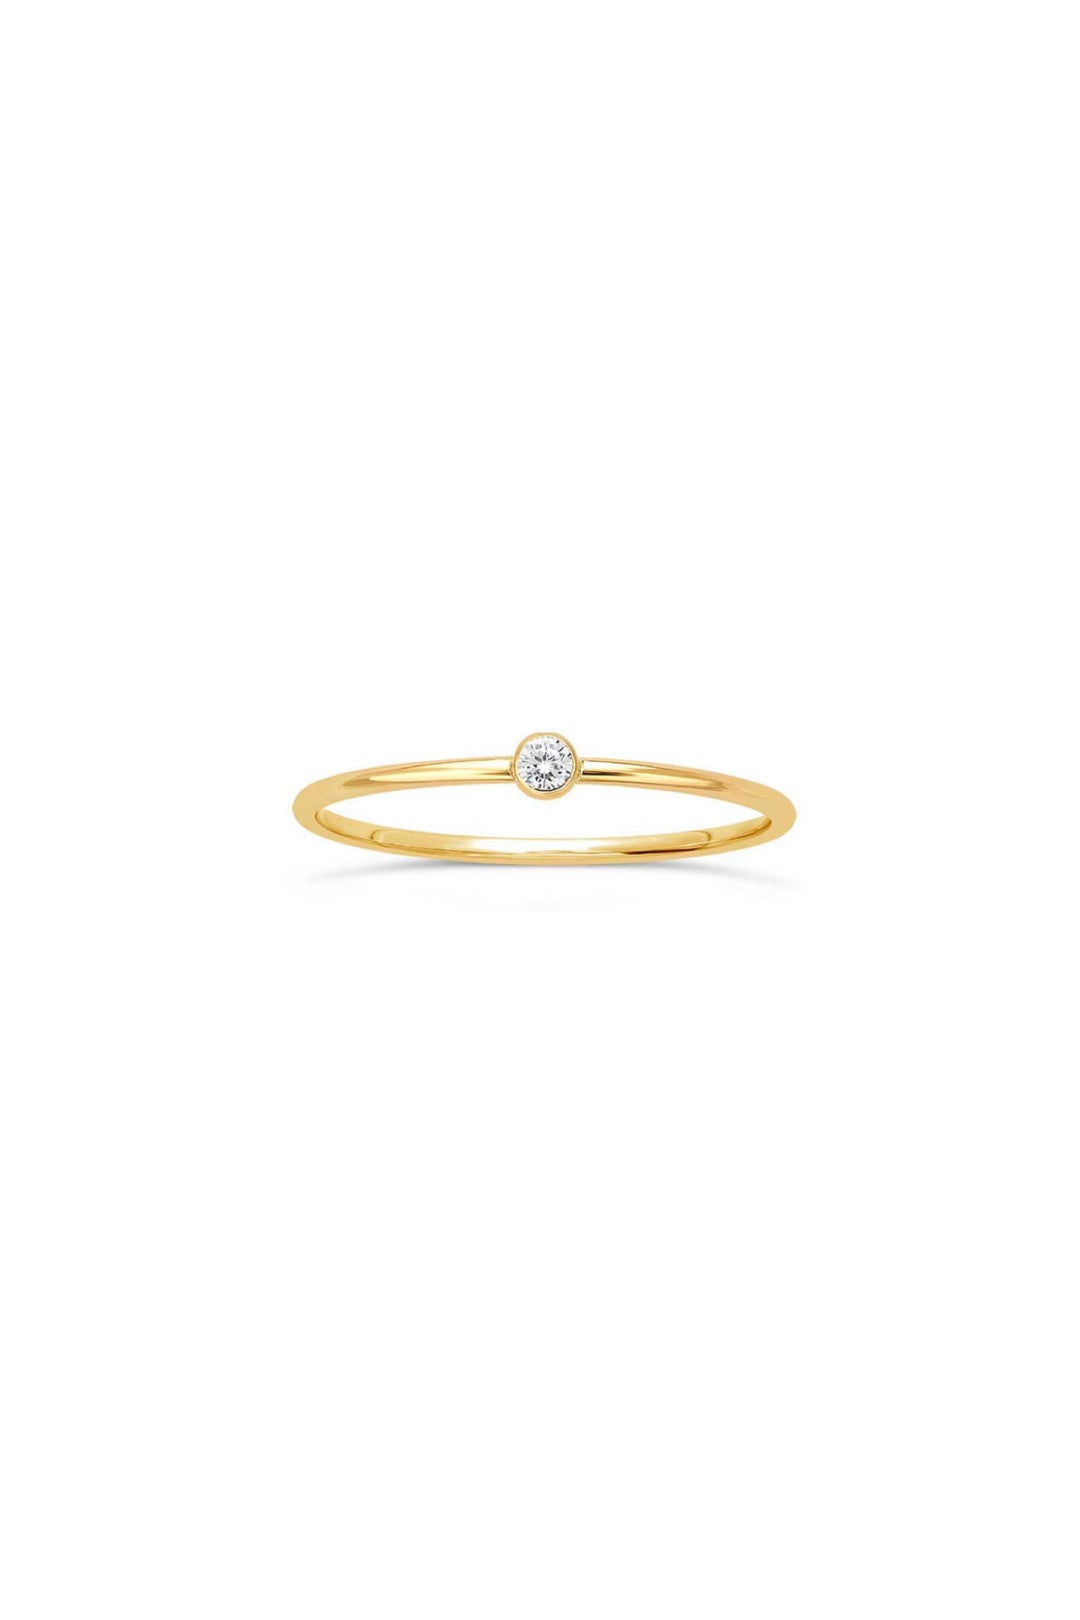 Stardust ring, gold